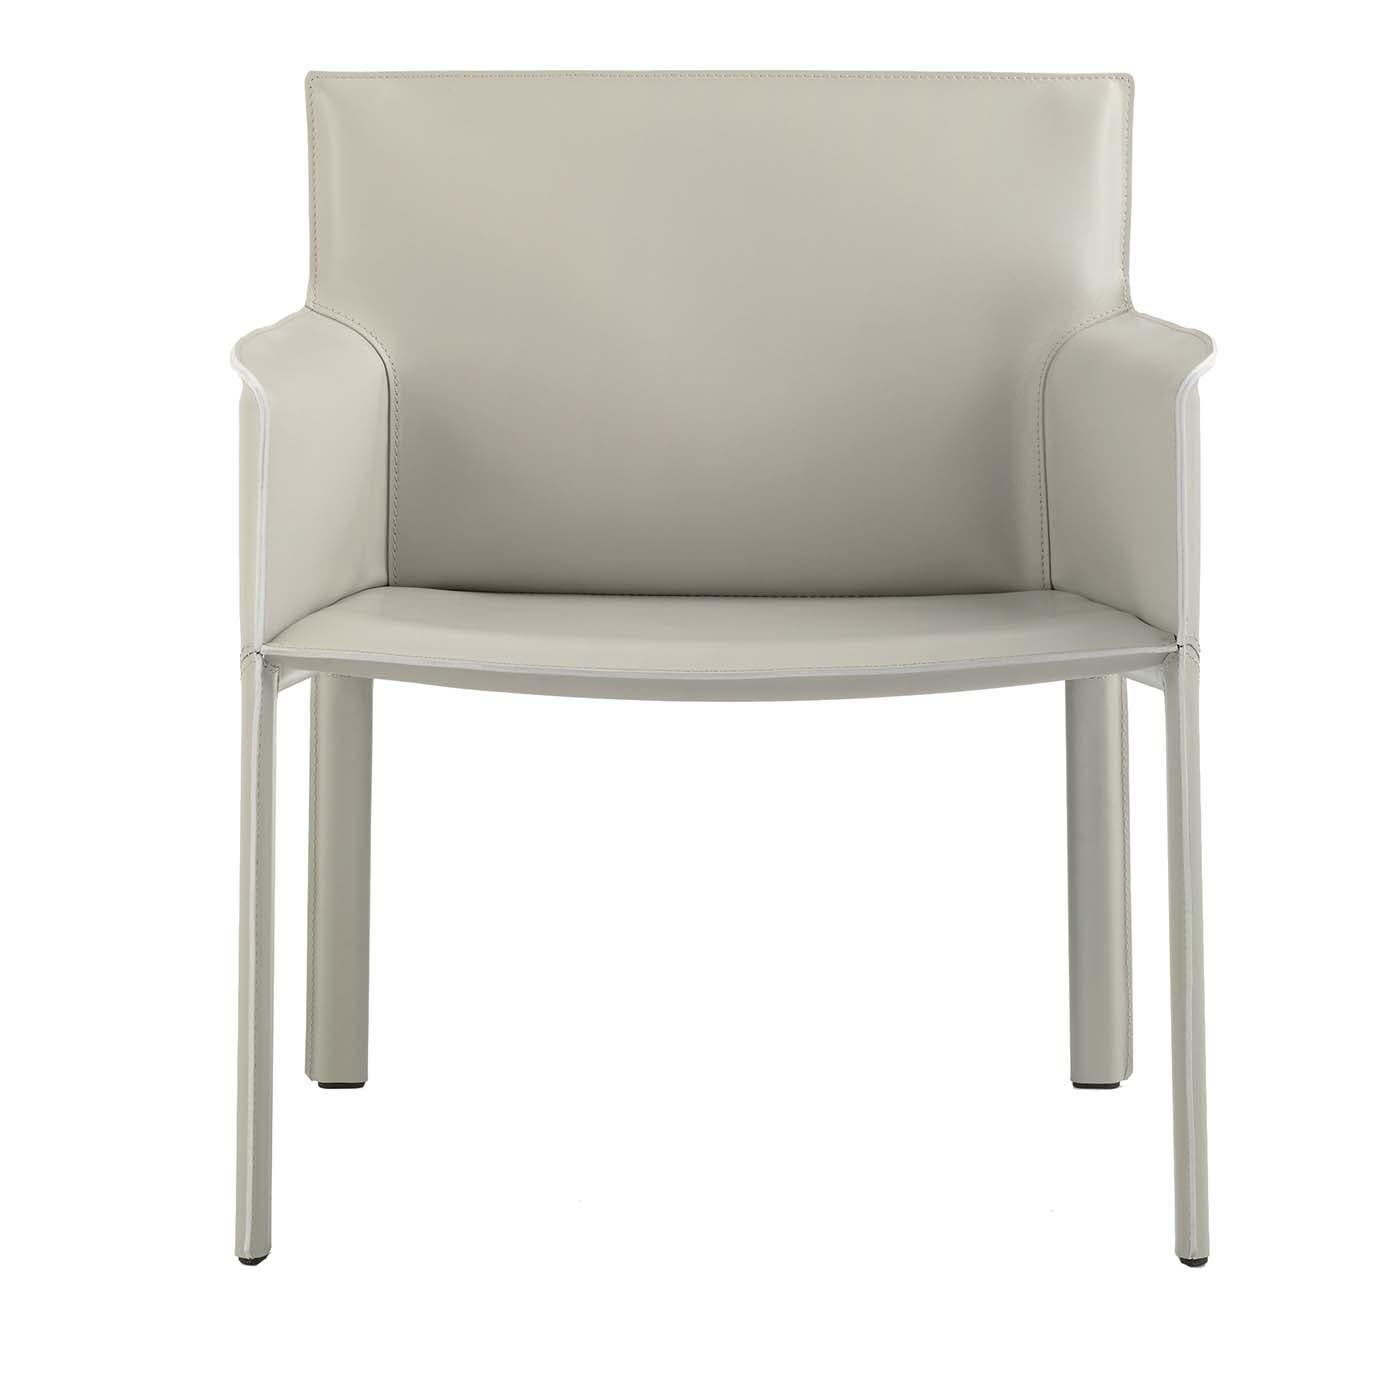 Italian Pasqualina Relax Armchair by Grassi & Bianchi For Sale